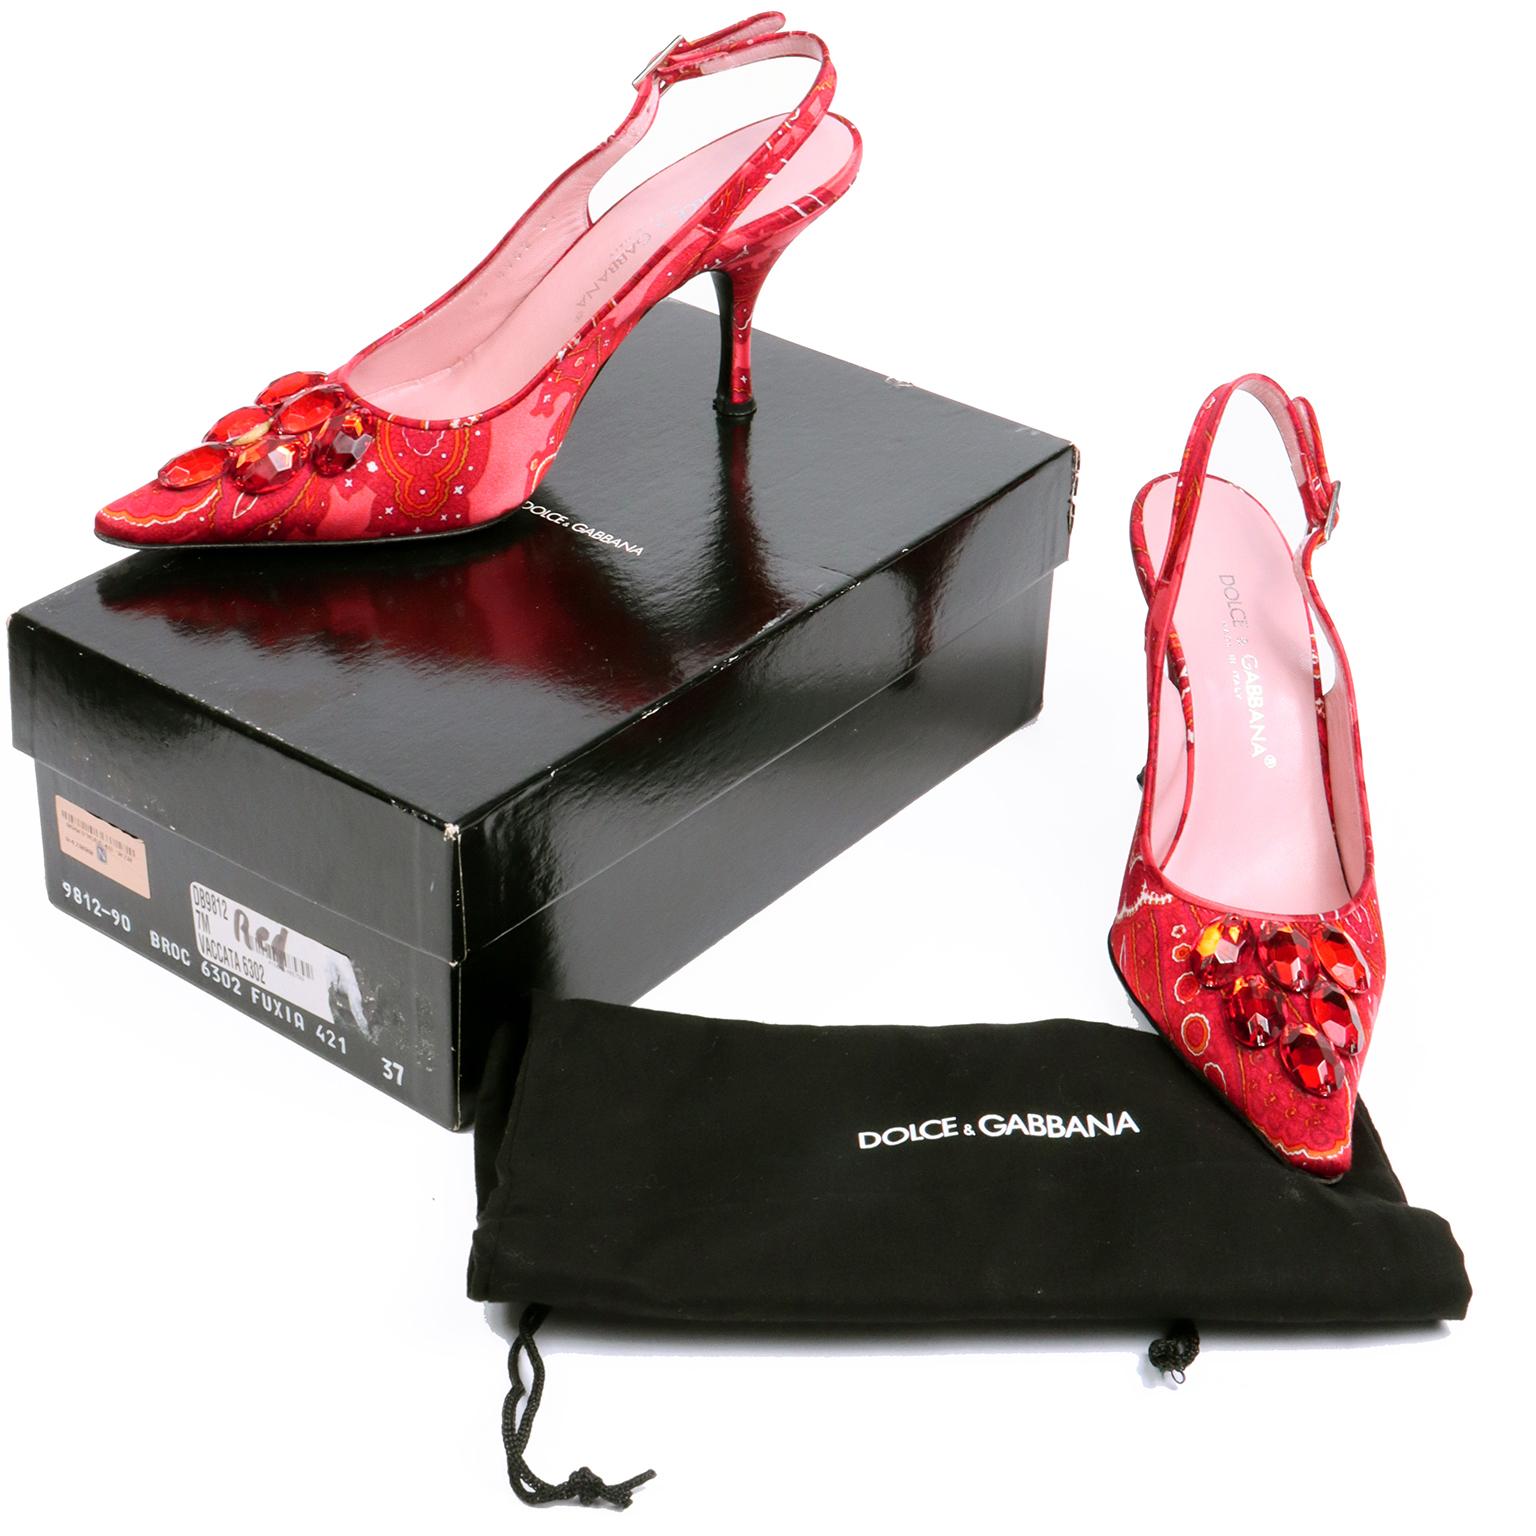 We love these vintage Dolce & Gabbana Red shoes! These pretty pointed toe slingback heels are in a beautiful red and deep salmon pink print with gorgeous faceted red oval stones on the toe box. The shoes come with their original box and